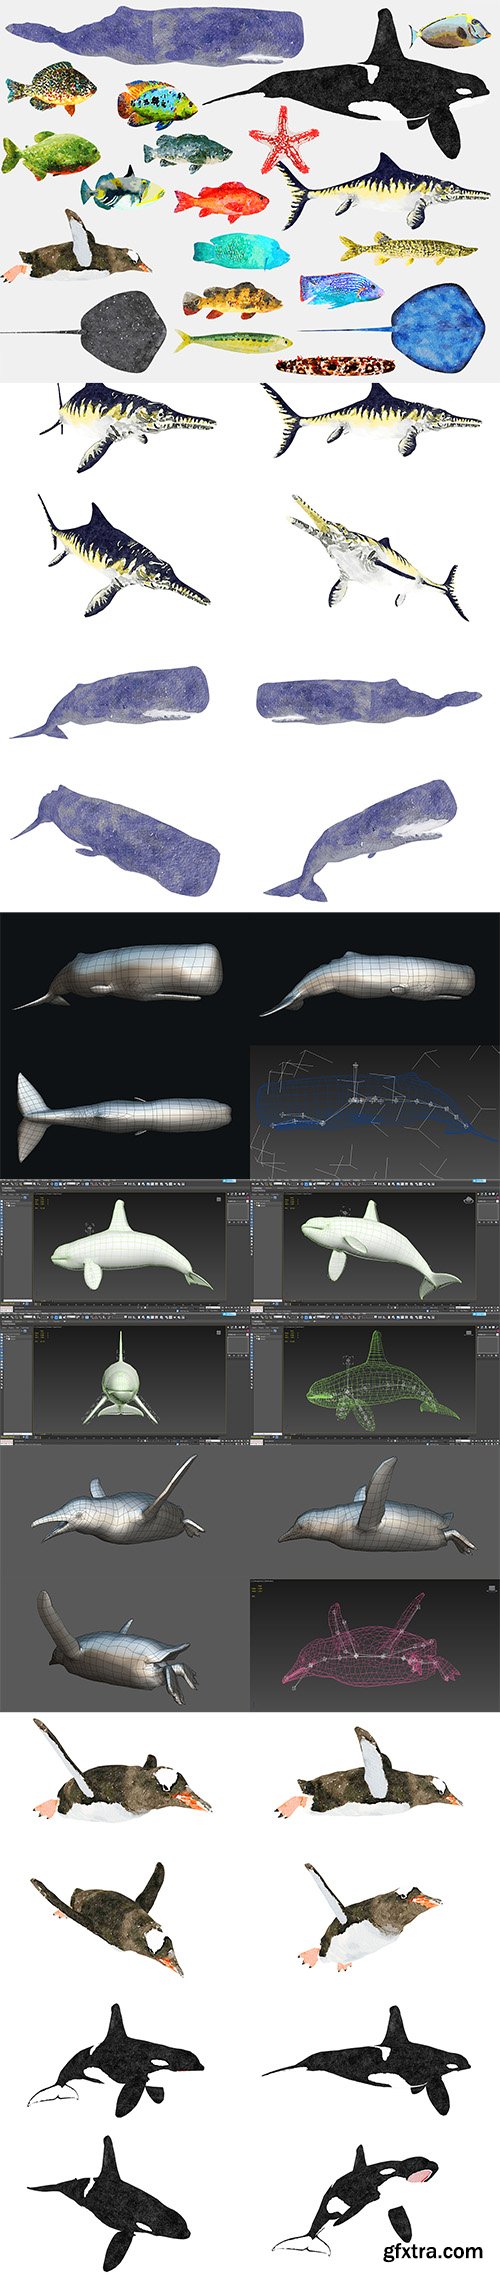 Cubebrush - Fish Illustration Collection - Animted Part 3